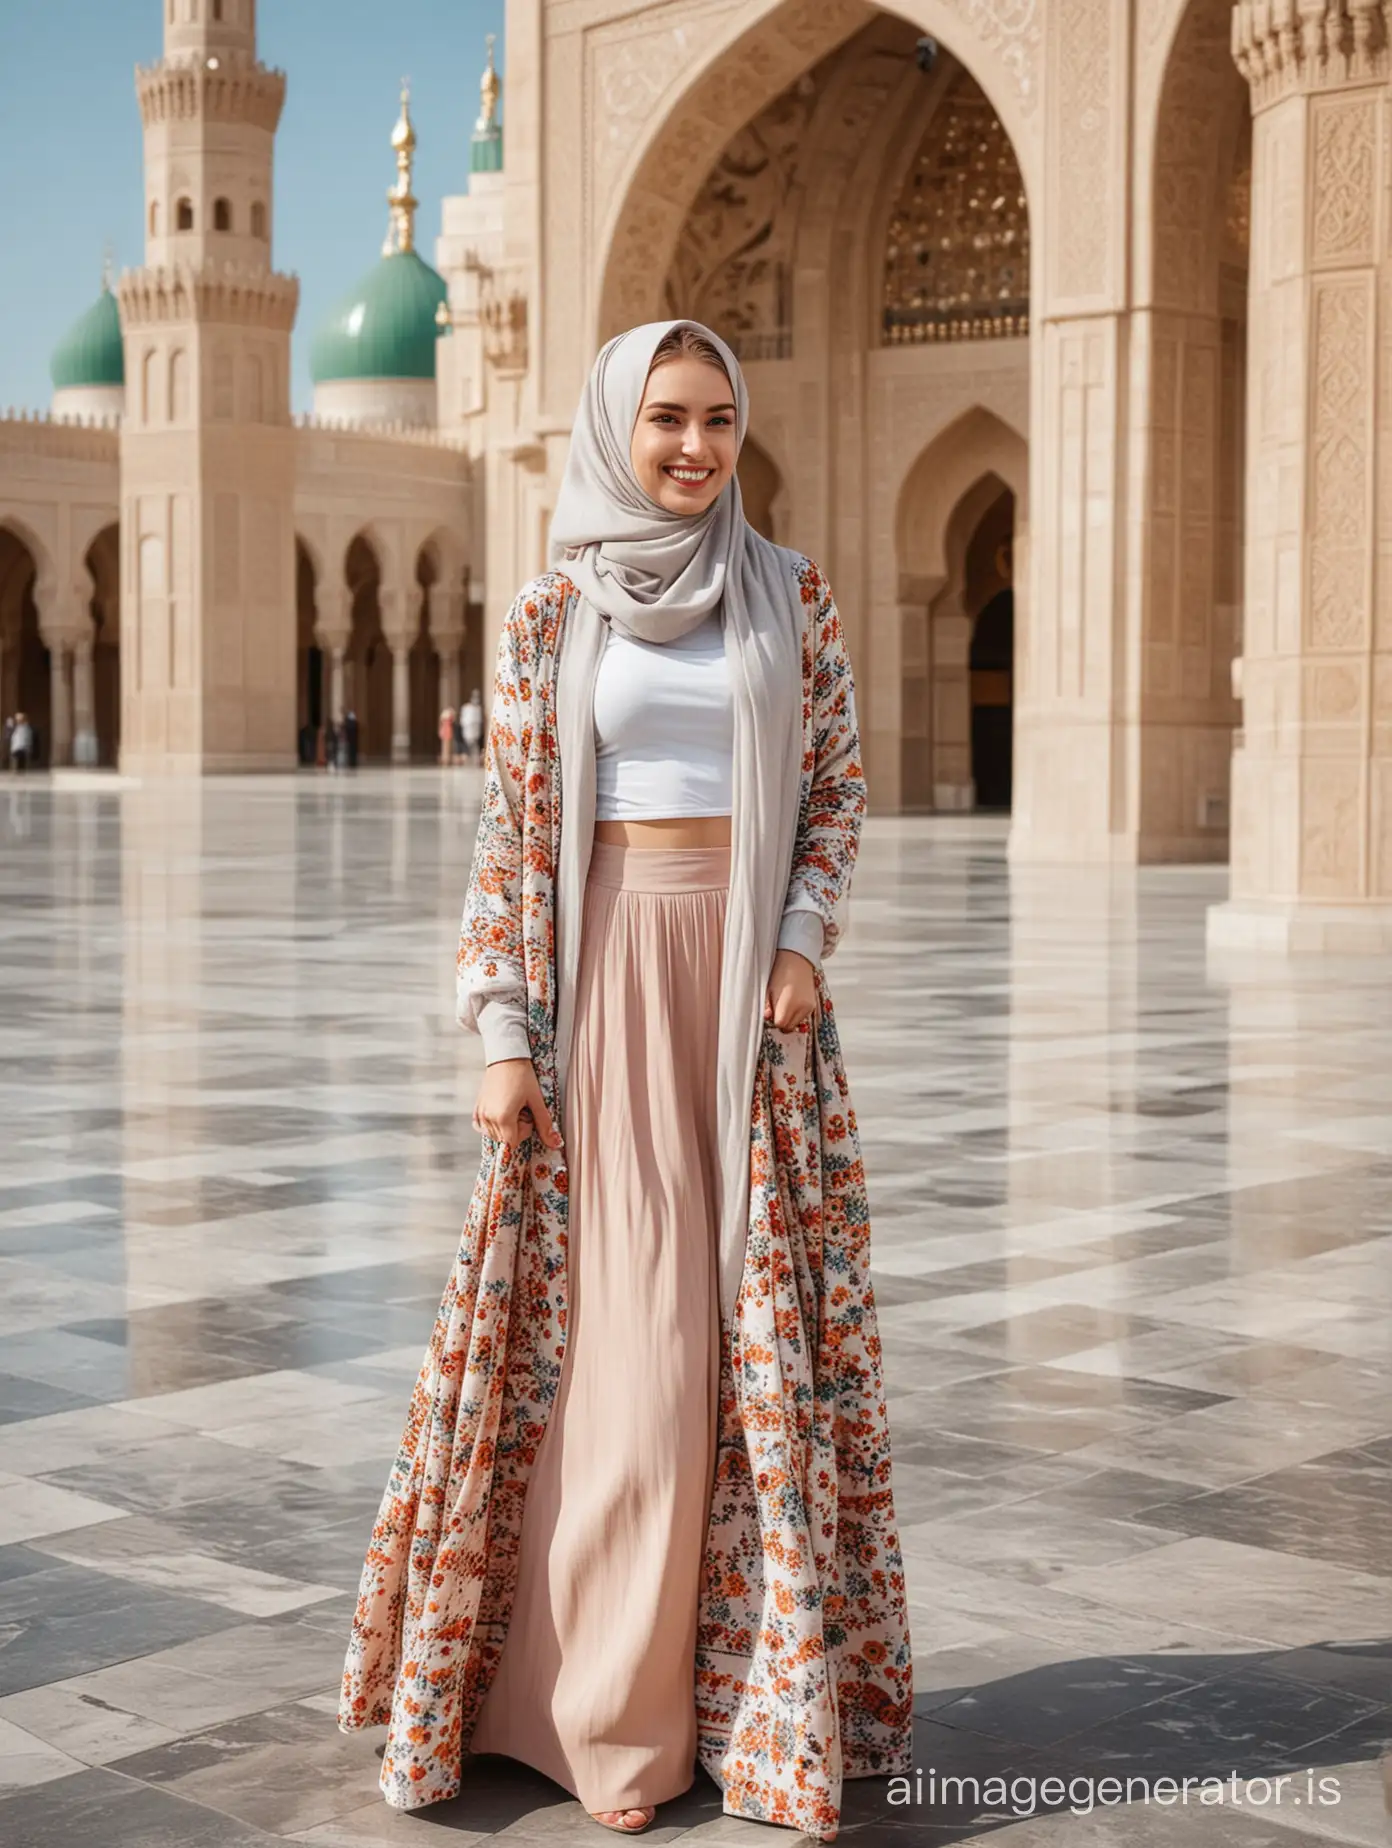 Russian-Girl-in-Hijab-Smiling-at-Mecca-Mosque